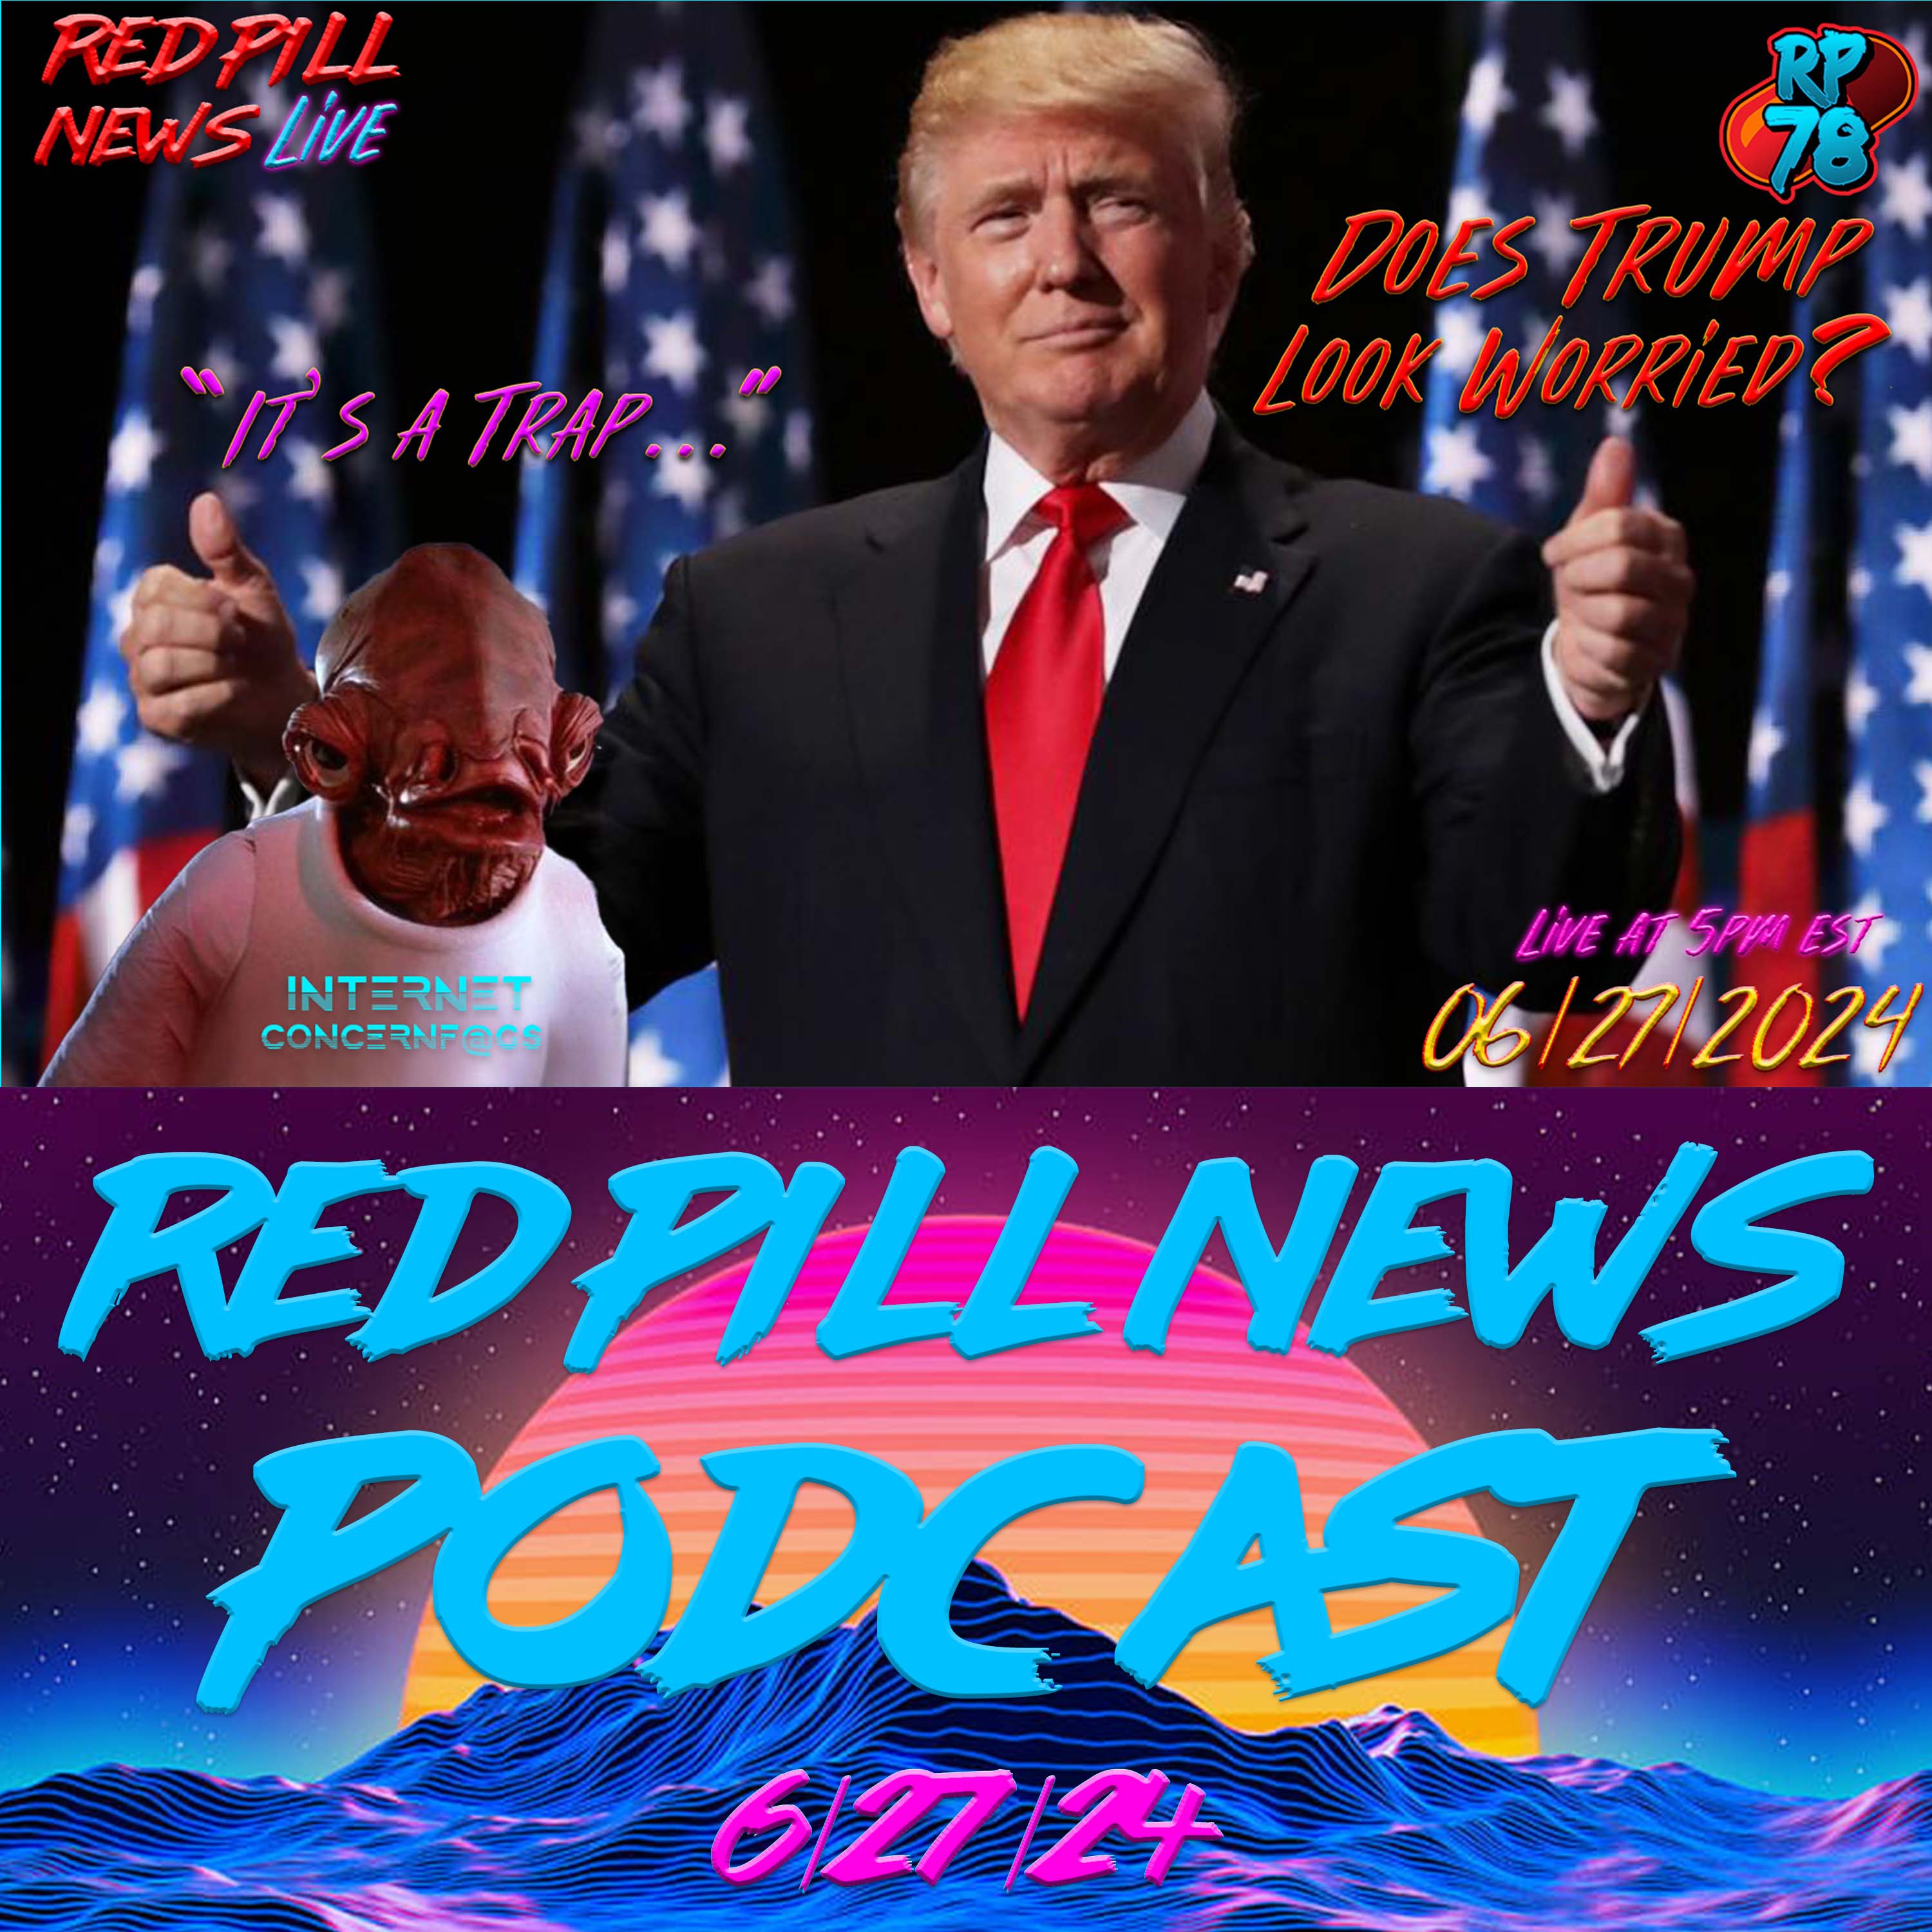 Debate Night! Why Is Everyone Second Guessing Trump on Red Pill News Live